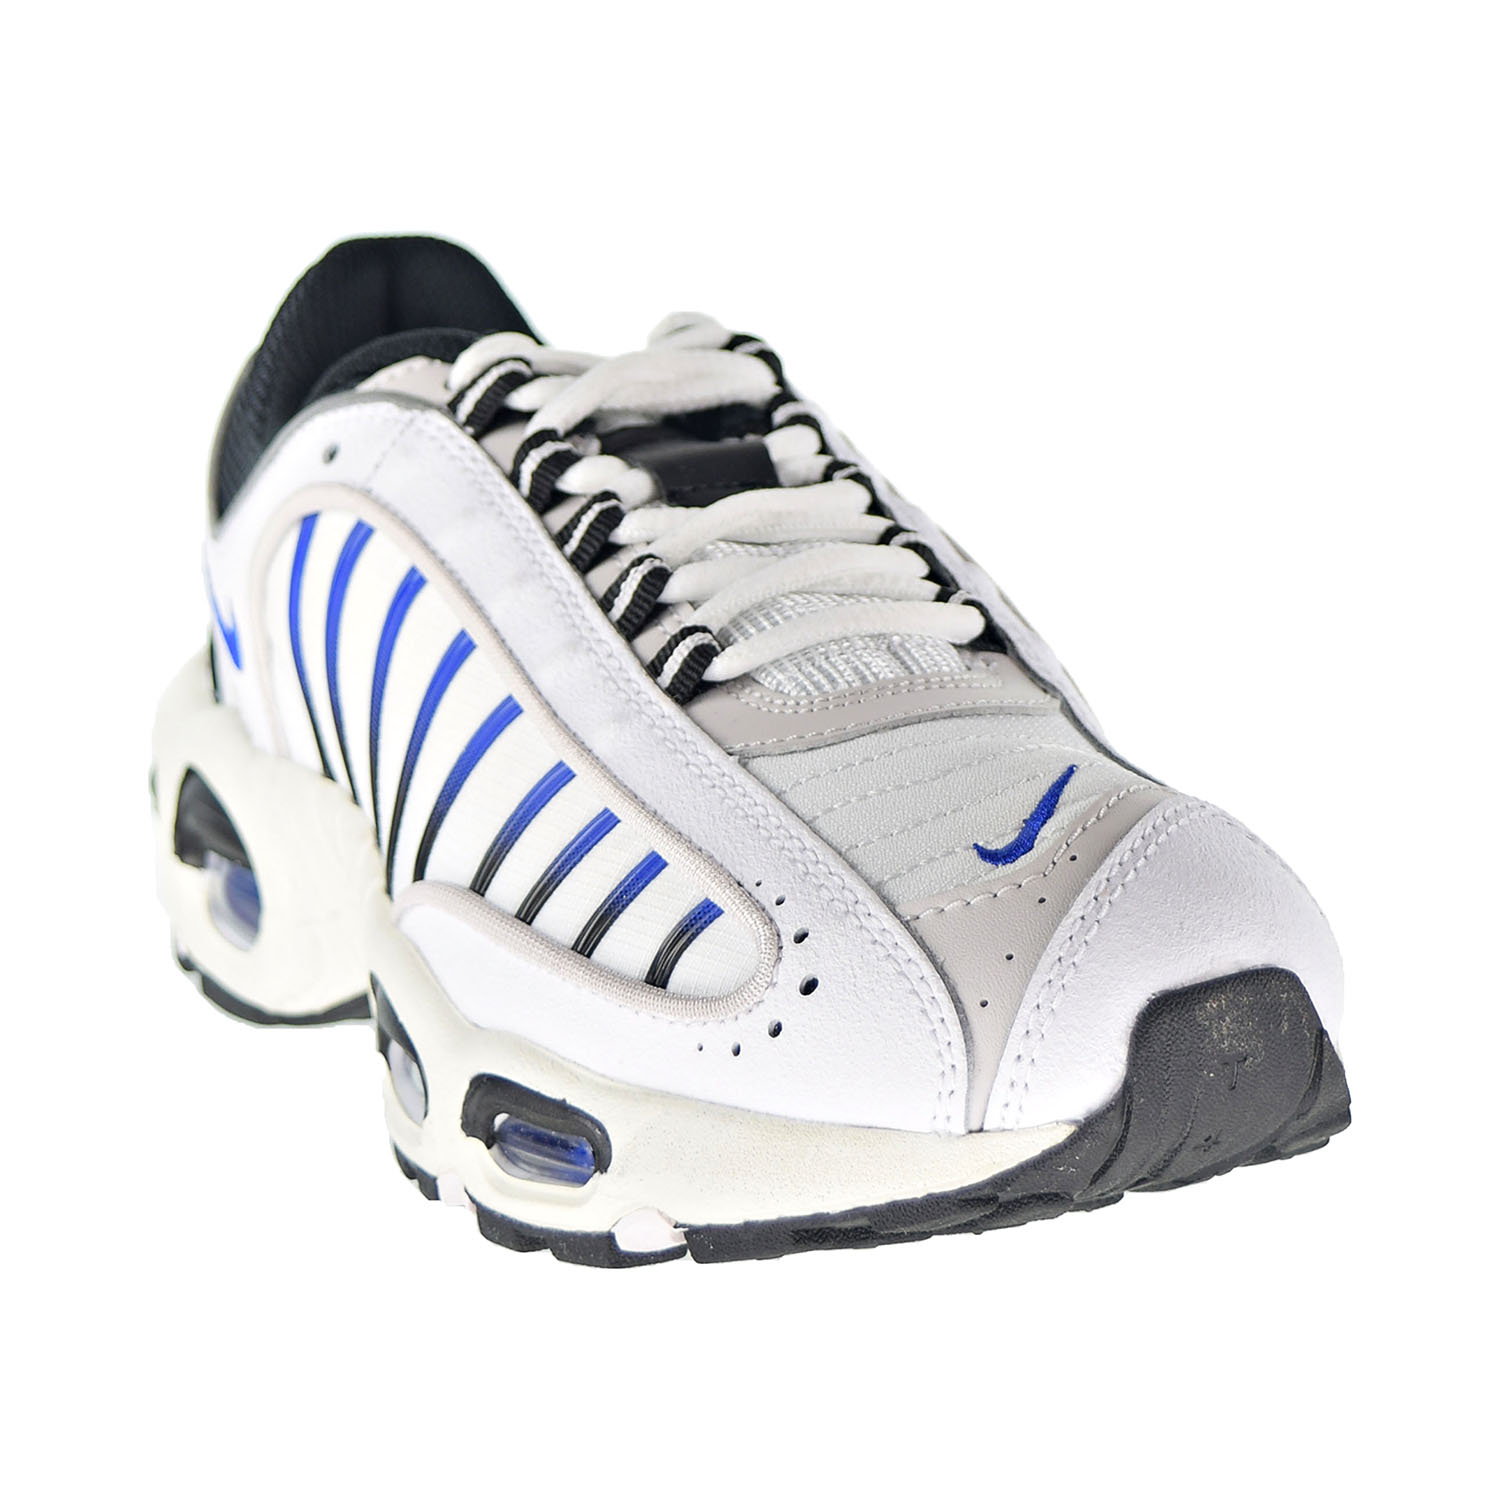 Nike Air Max Tailwind IV Men's Shoes White-Summit White-Vast aq2567-105 - image 2 of 6